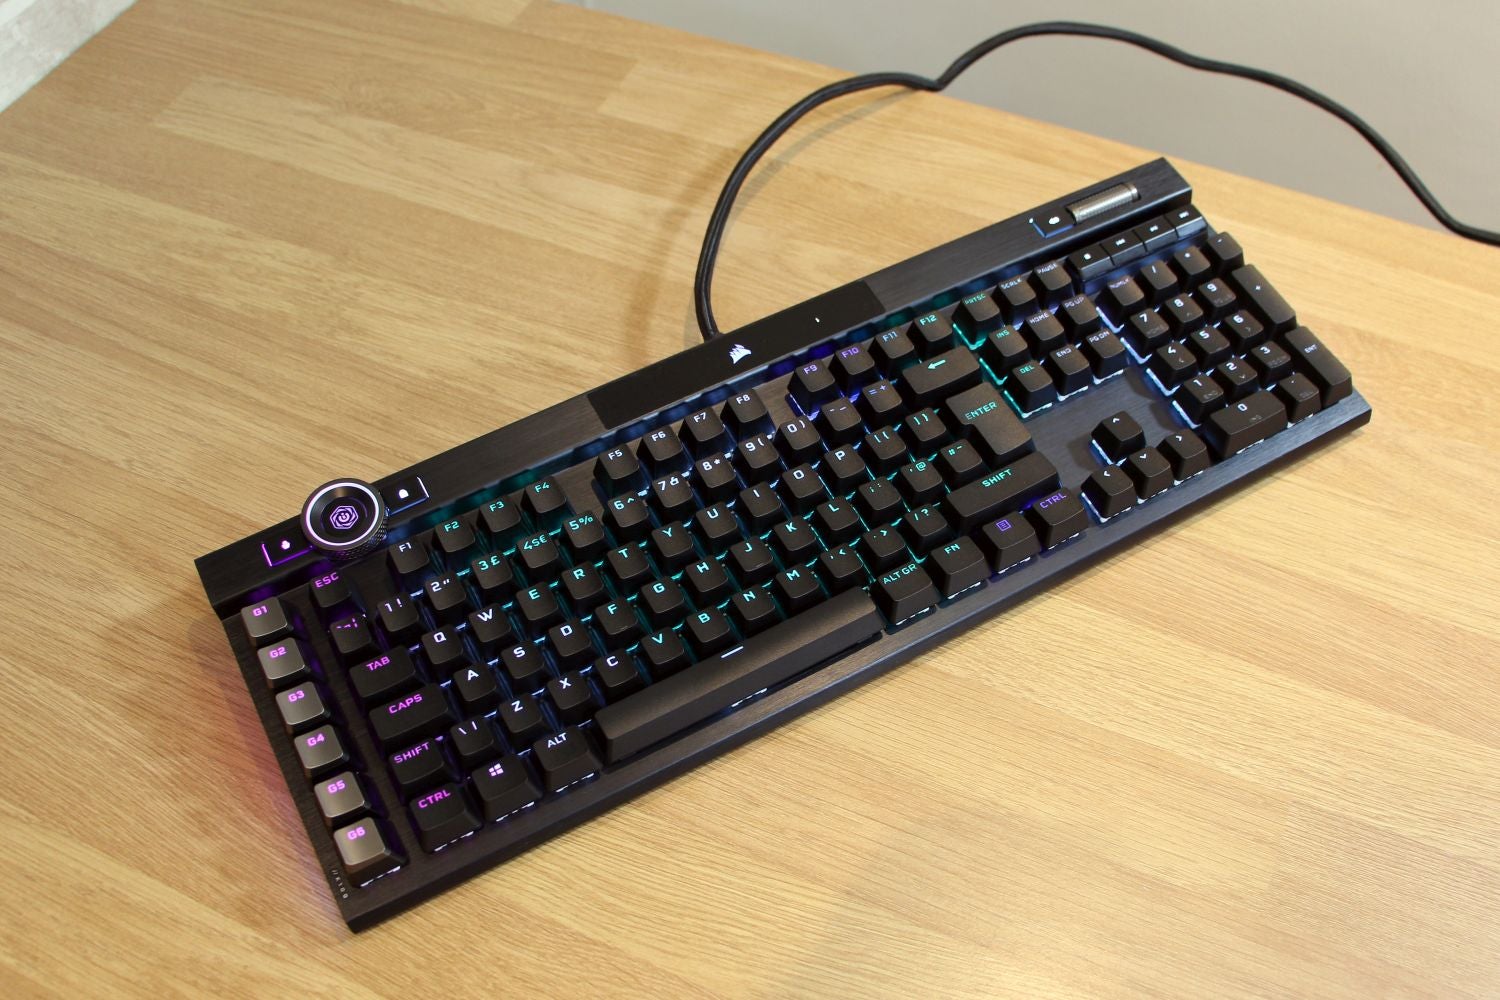 The Corsair K100 sees 3.2mm key travel with an actuation point of just 1mm.